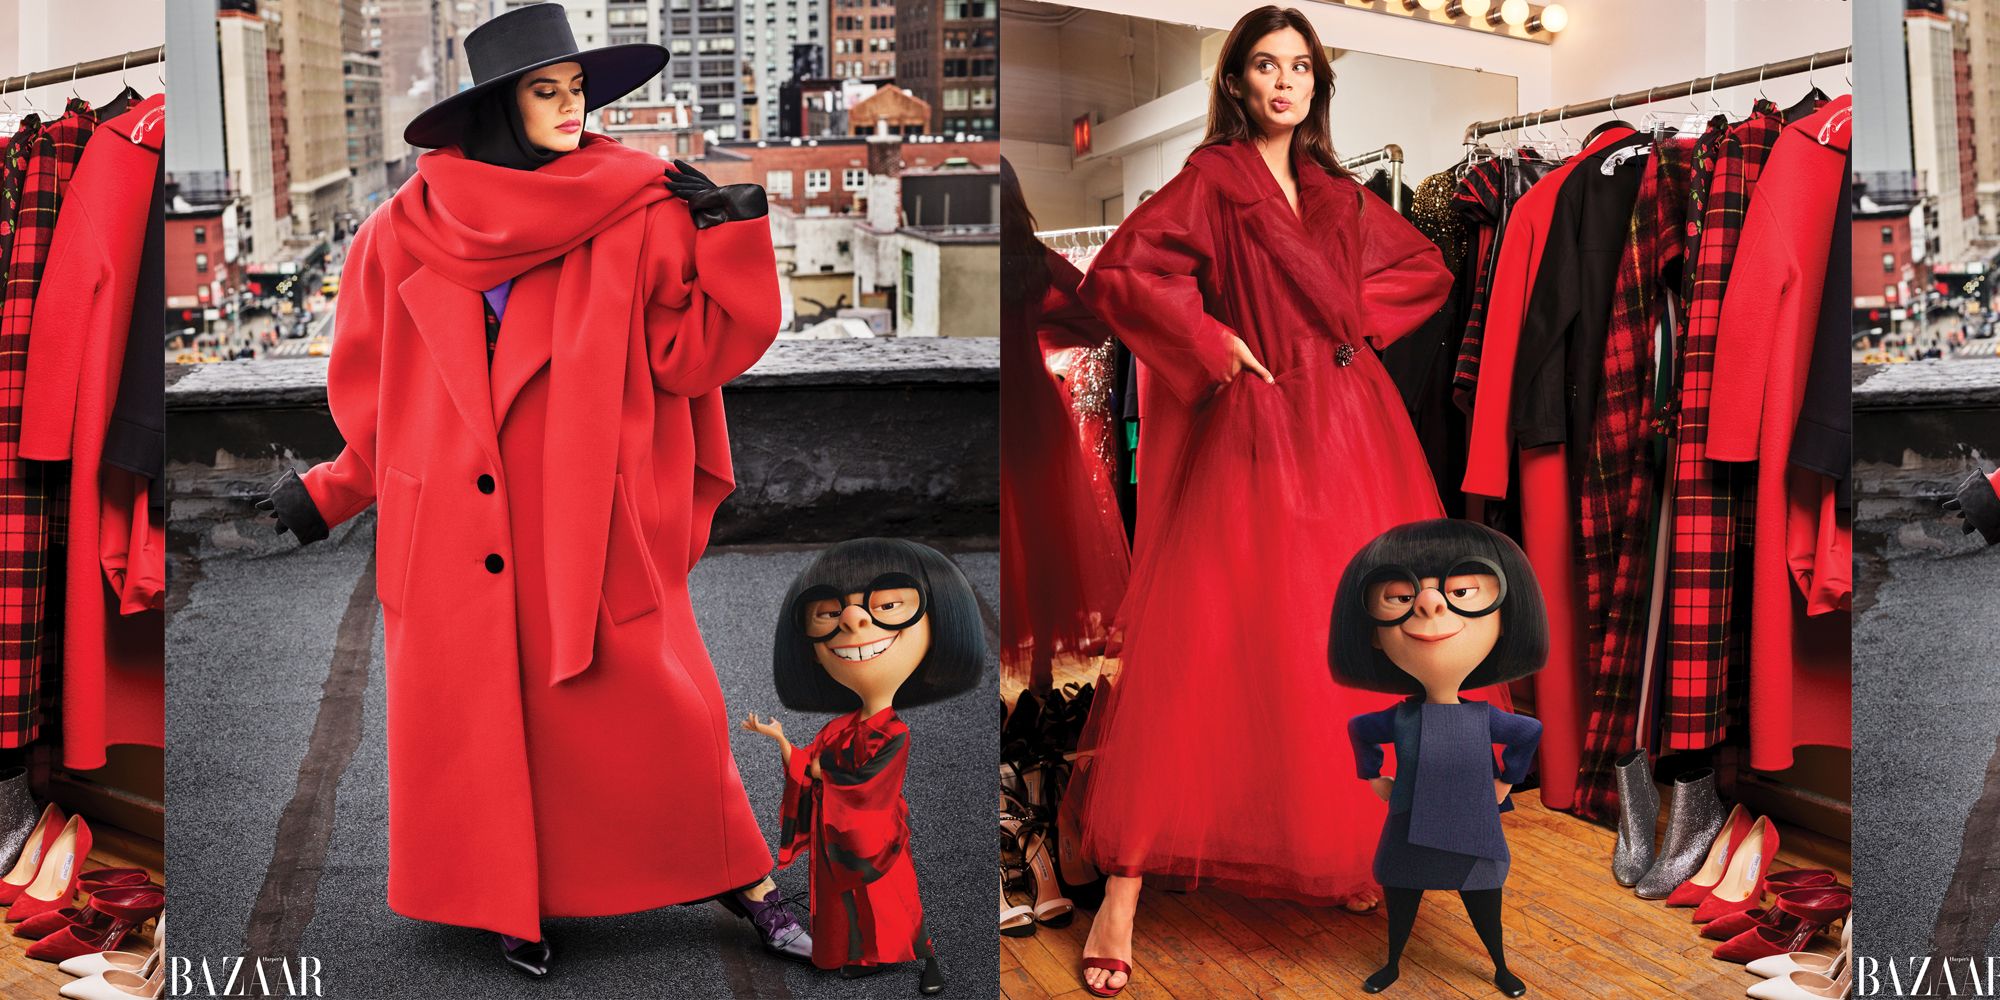 Edna Mode is the fashion icon of our time